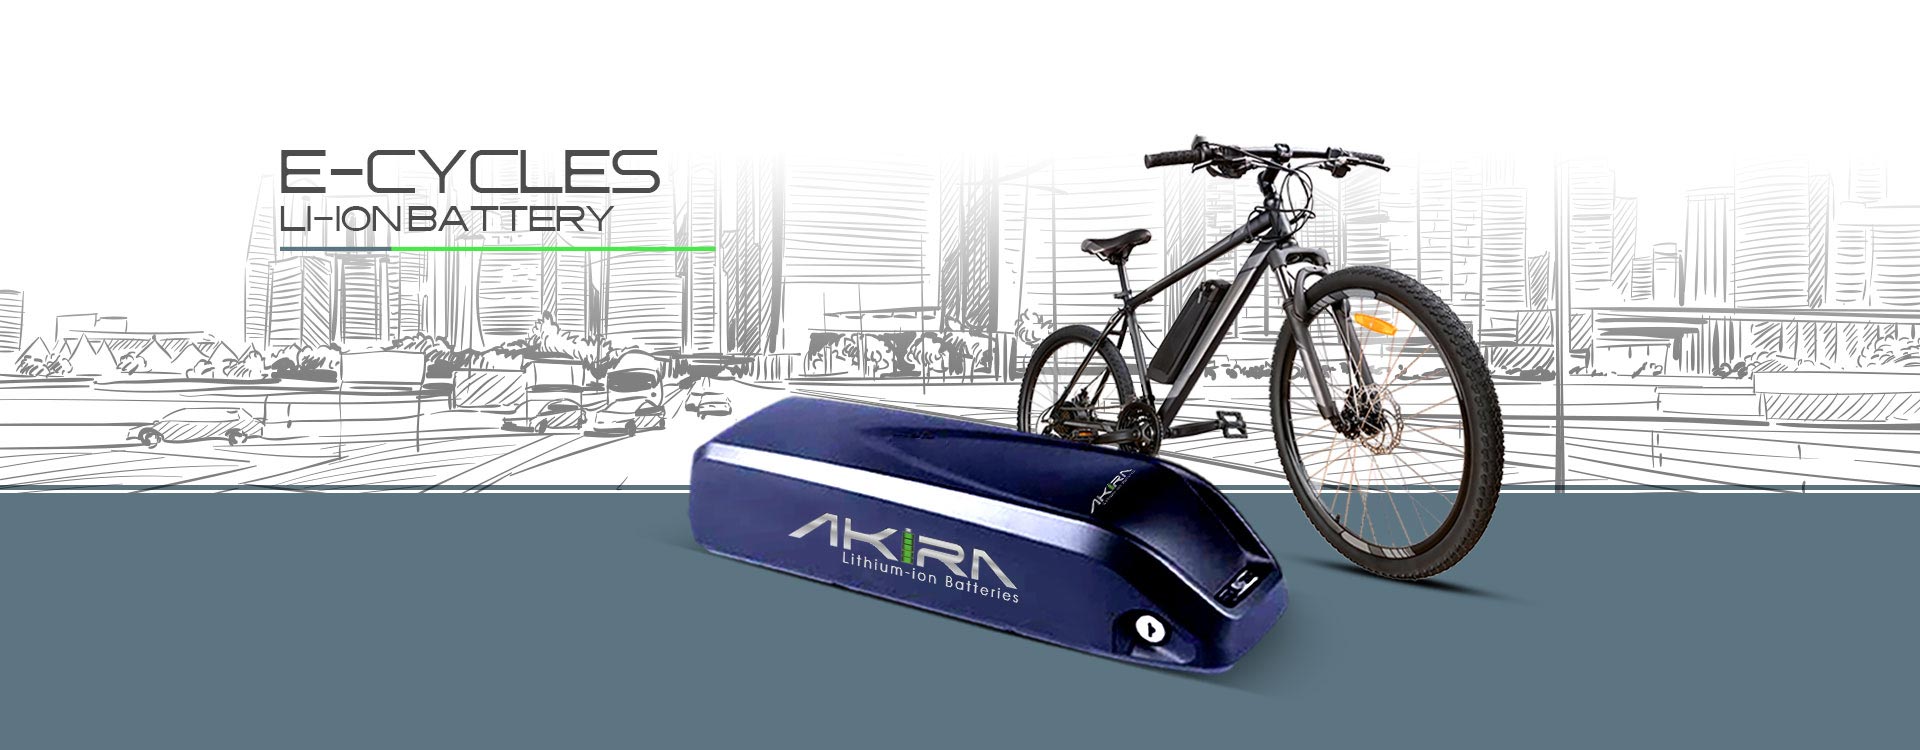 E-Cycle Lithium-ion Battery